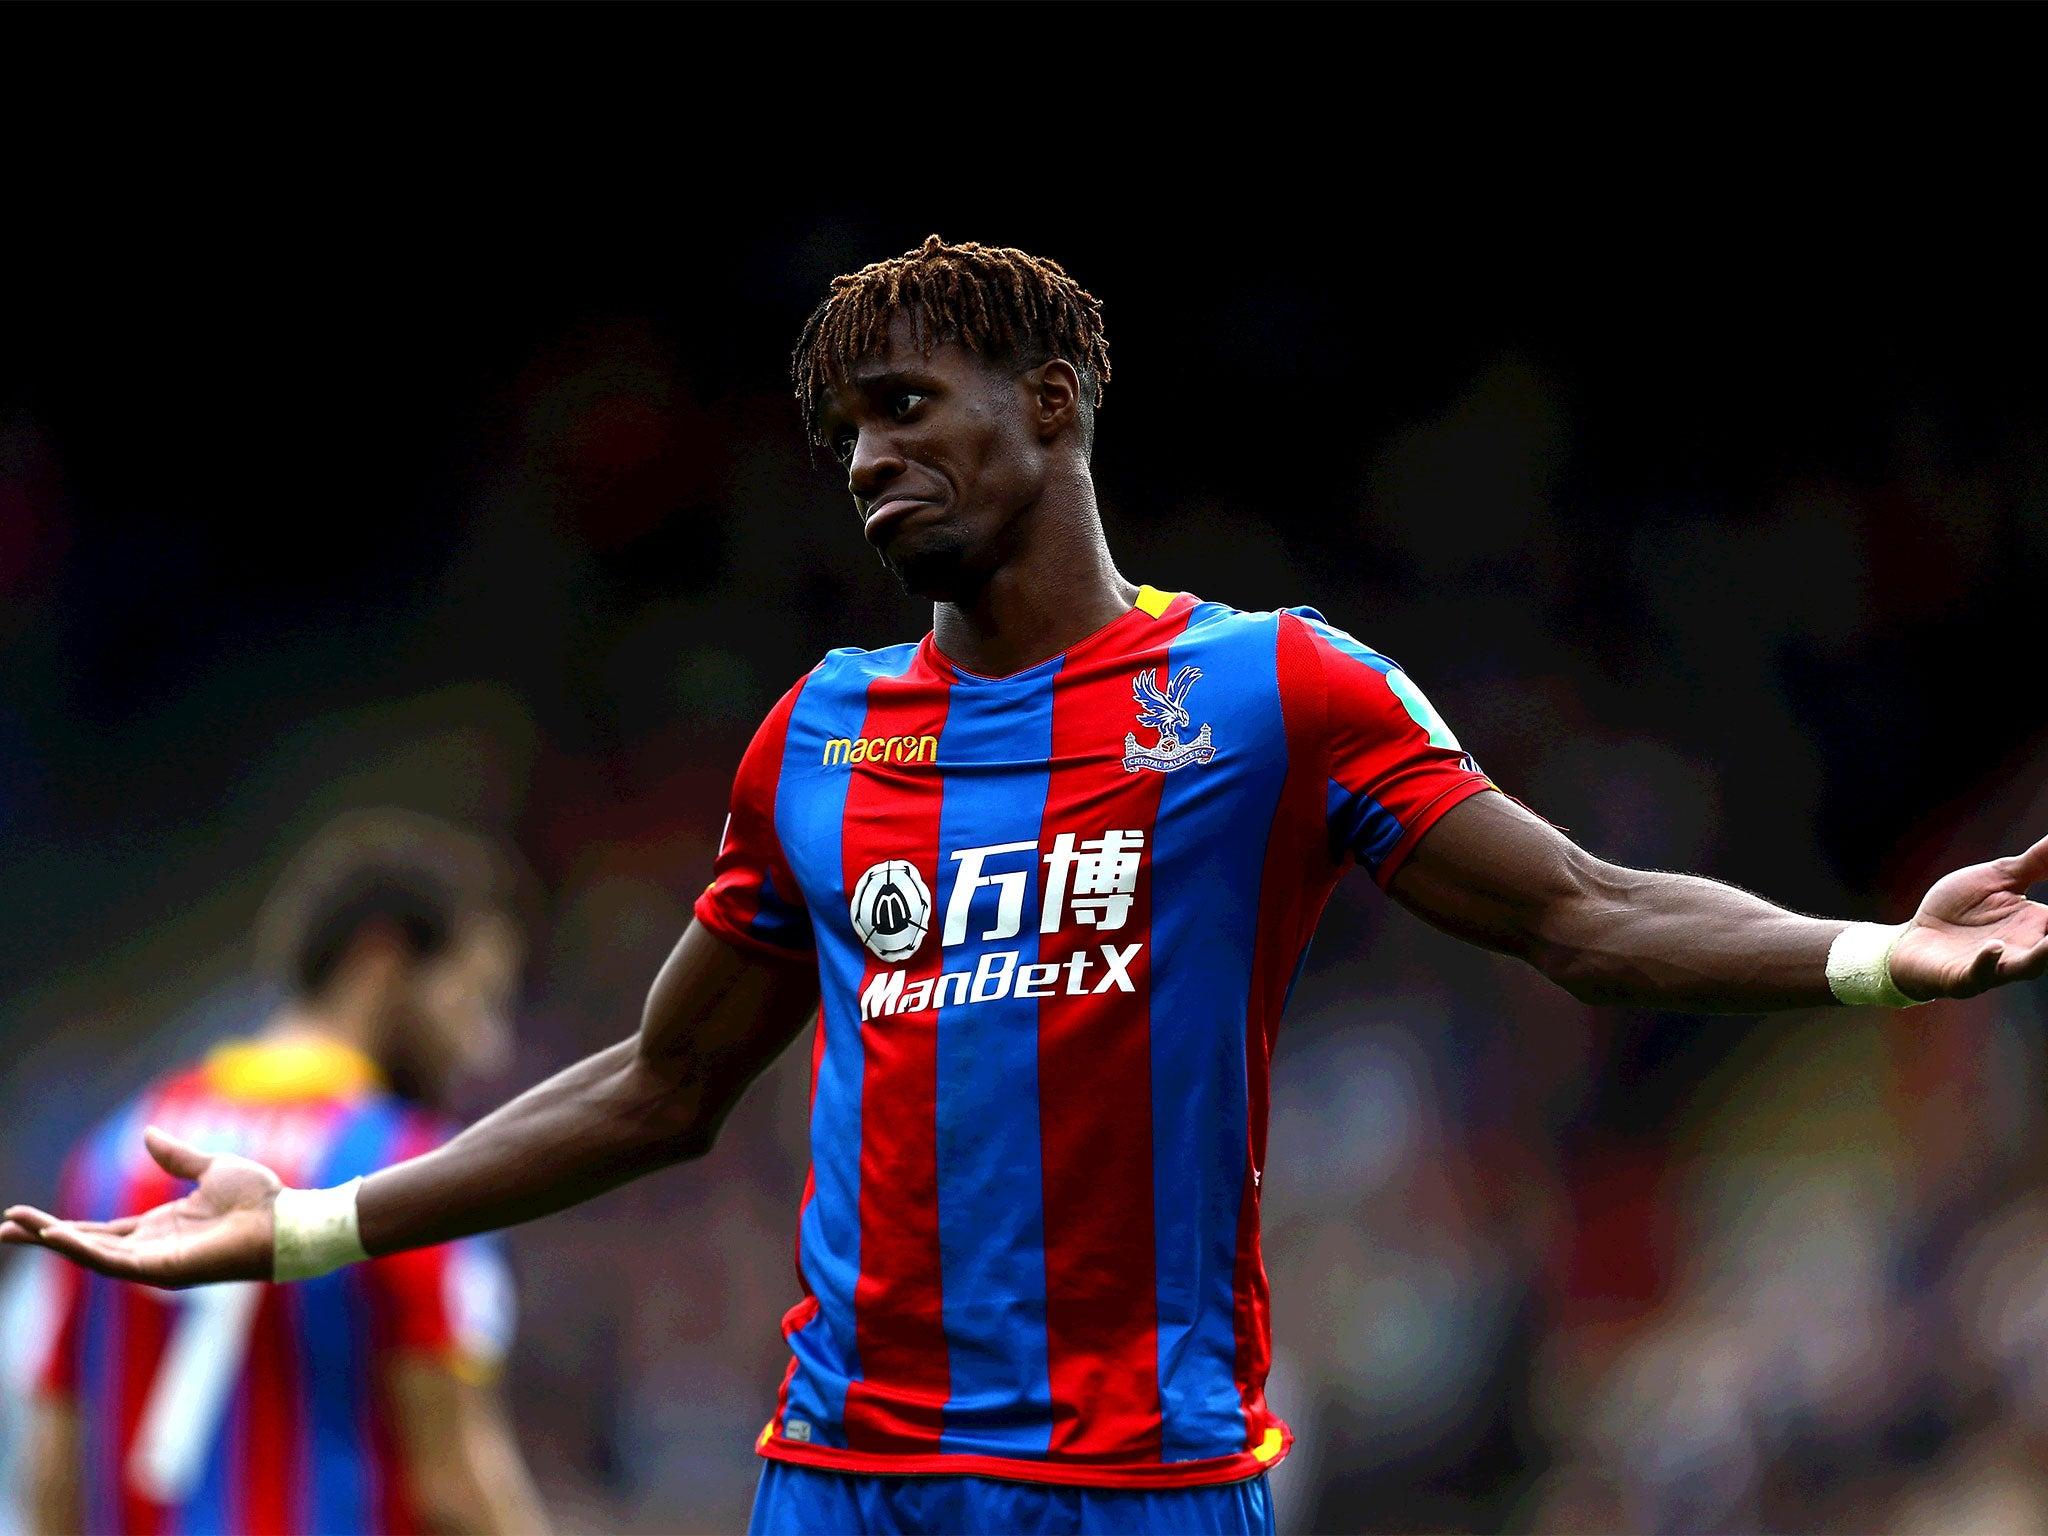 Harshly treated' by referees and kicked every week, Wilfried Zaha's